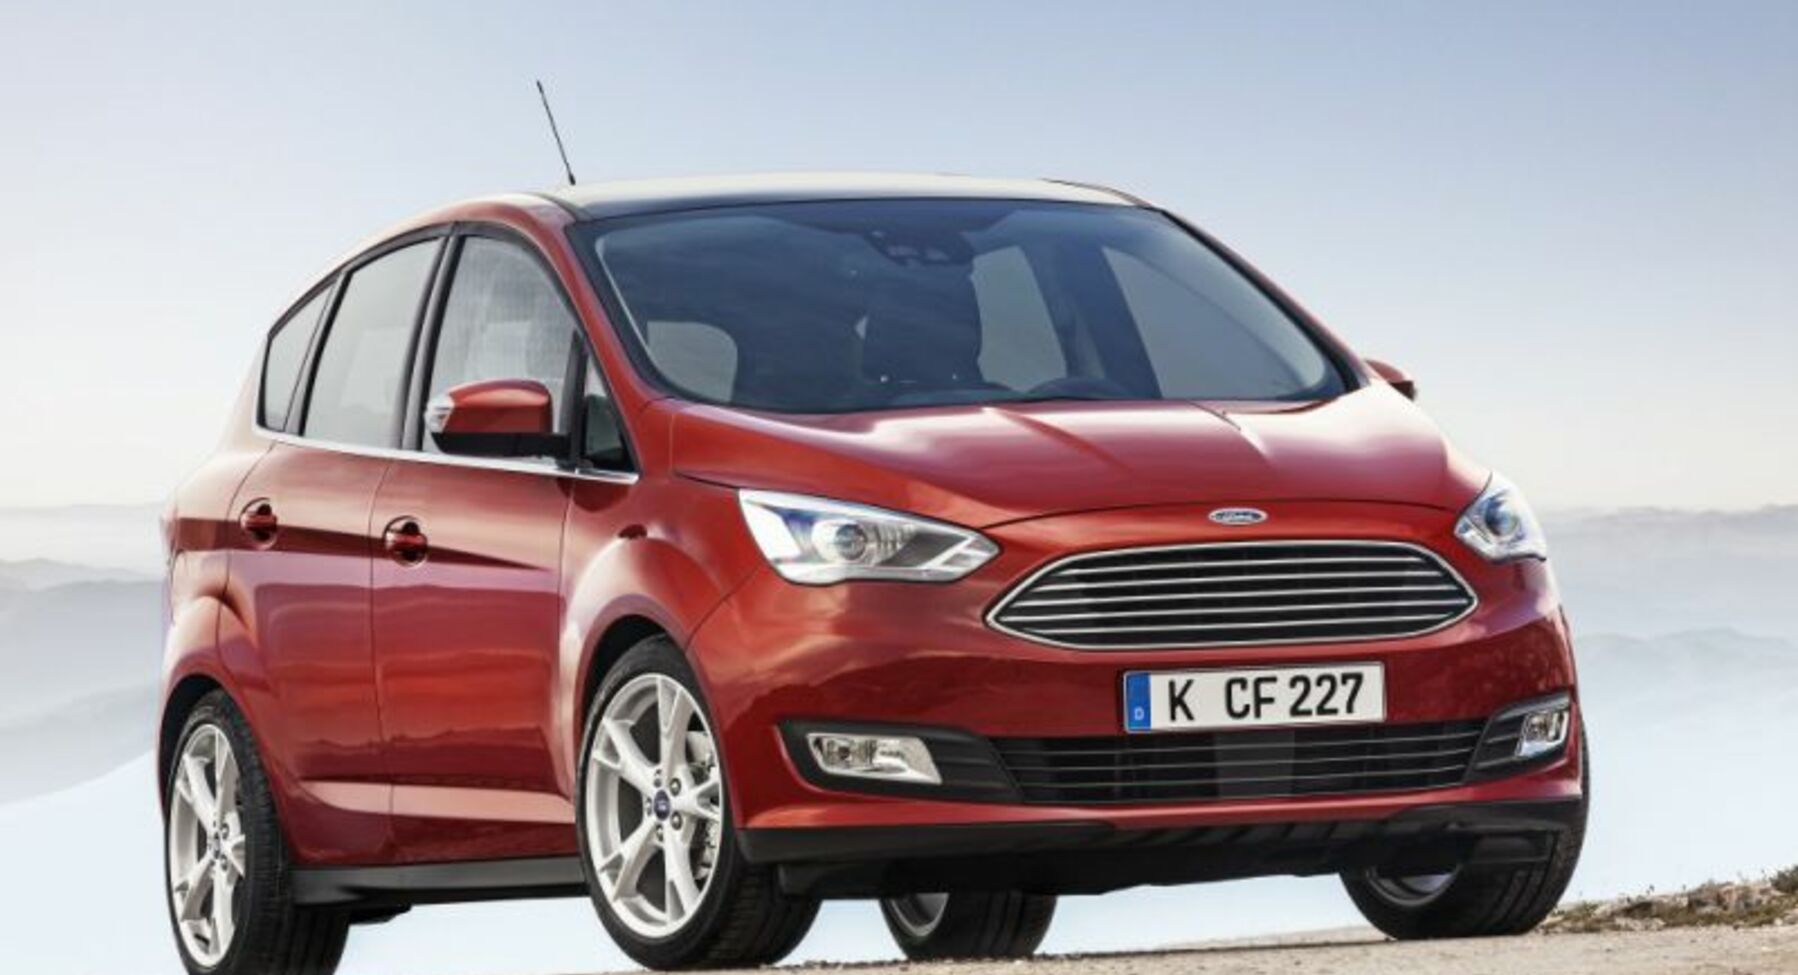 Ford C-MAX II (facelift 2015) 2.0 TDCi (150 Hp) S&S 2015, 2016, 2017, 2018, 2019, 2020, 2021